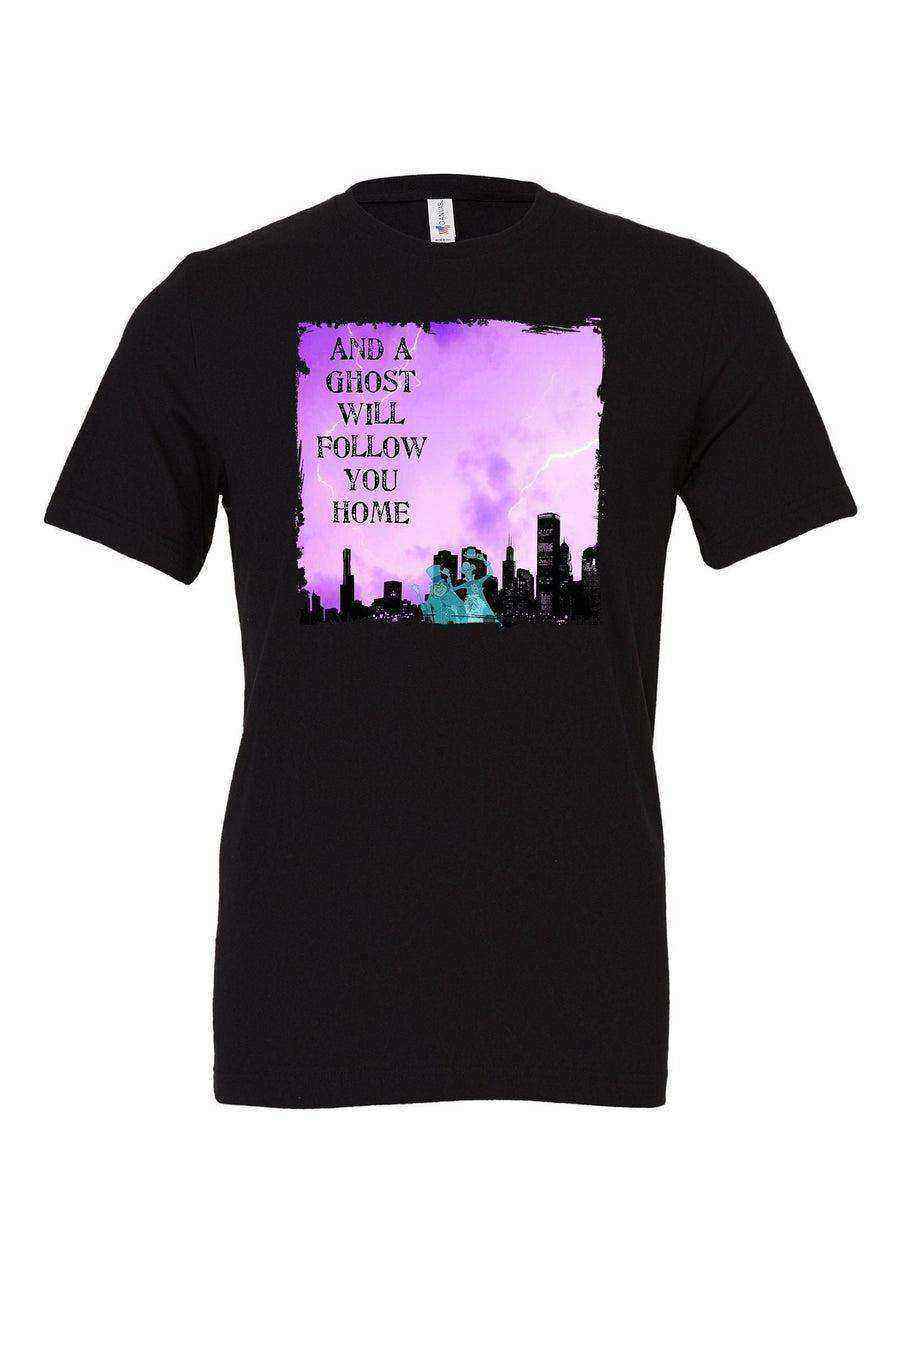 A Ghost Will Follow You Home (Chicago) Shirt | Haunted Mansion Shirt - Dylan's Tees